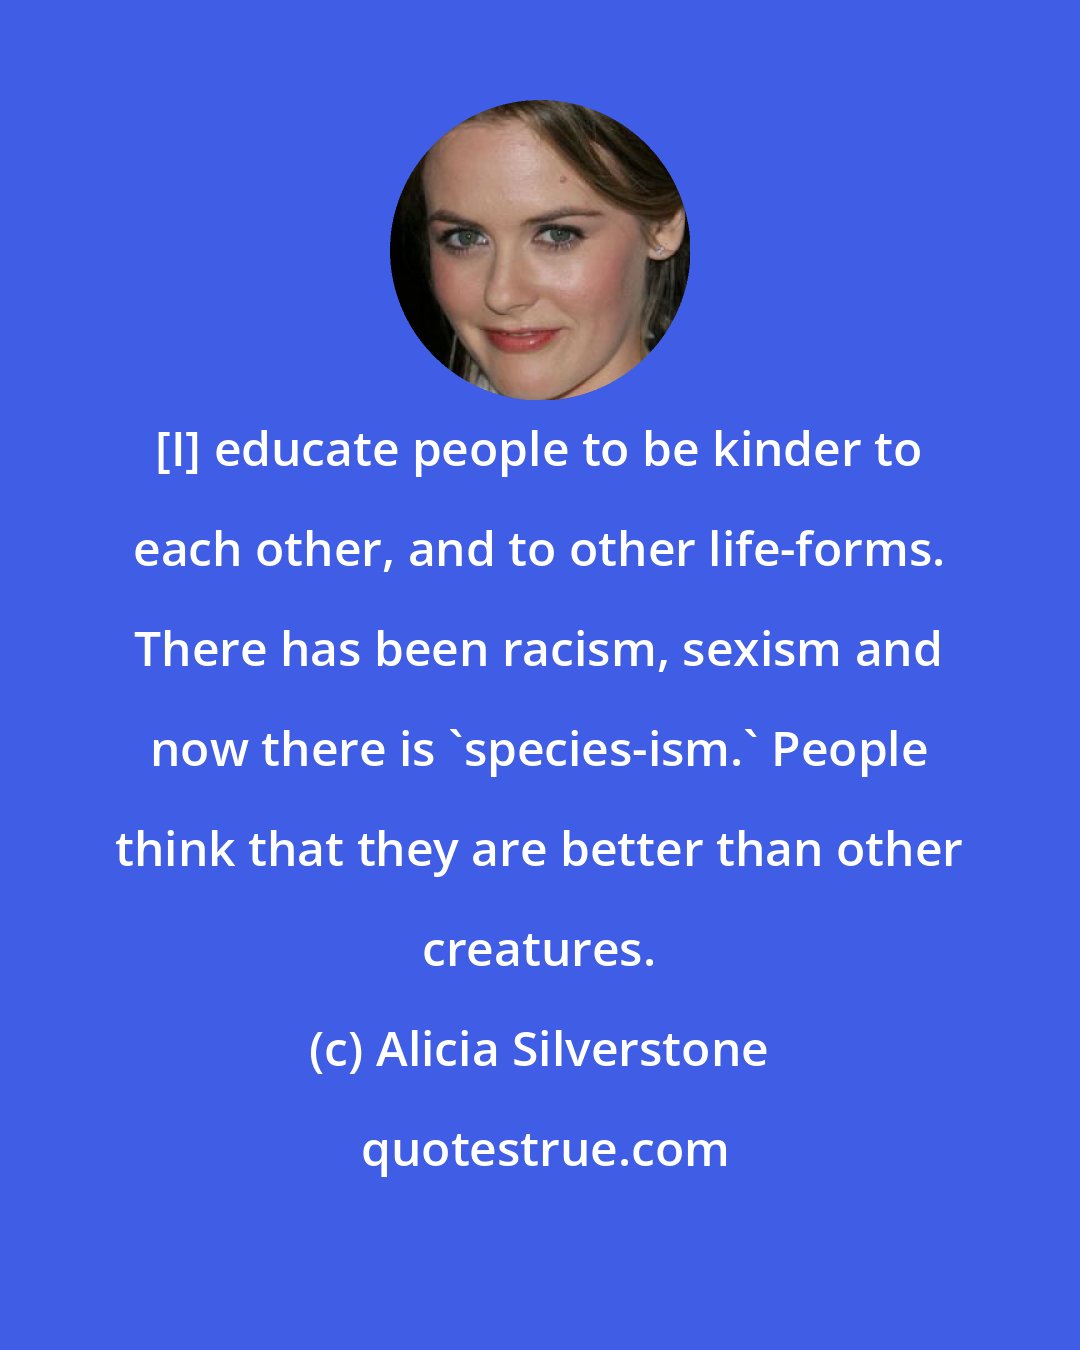 Alicia Silverstone: [I] educate people to be kinder to each other, and to other life-forms. There has been racism, sexism and now there is 'species-ism.' People think that they are better than other creatures.